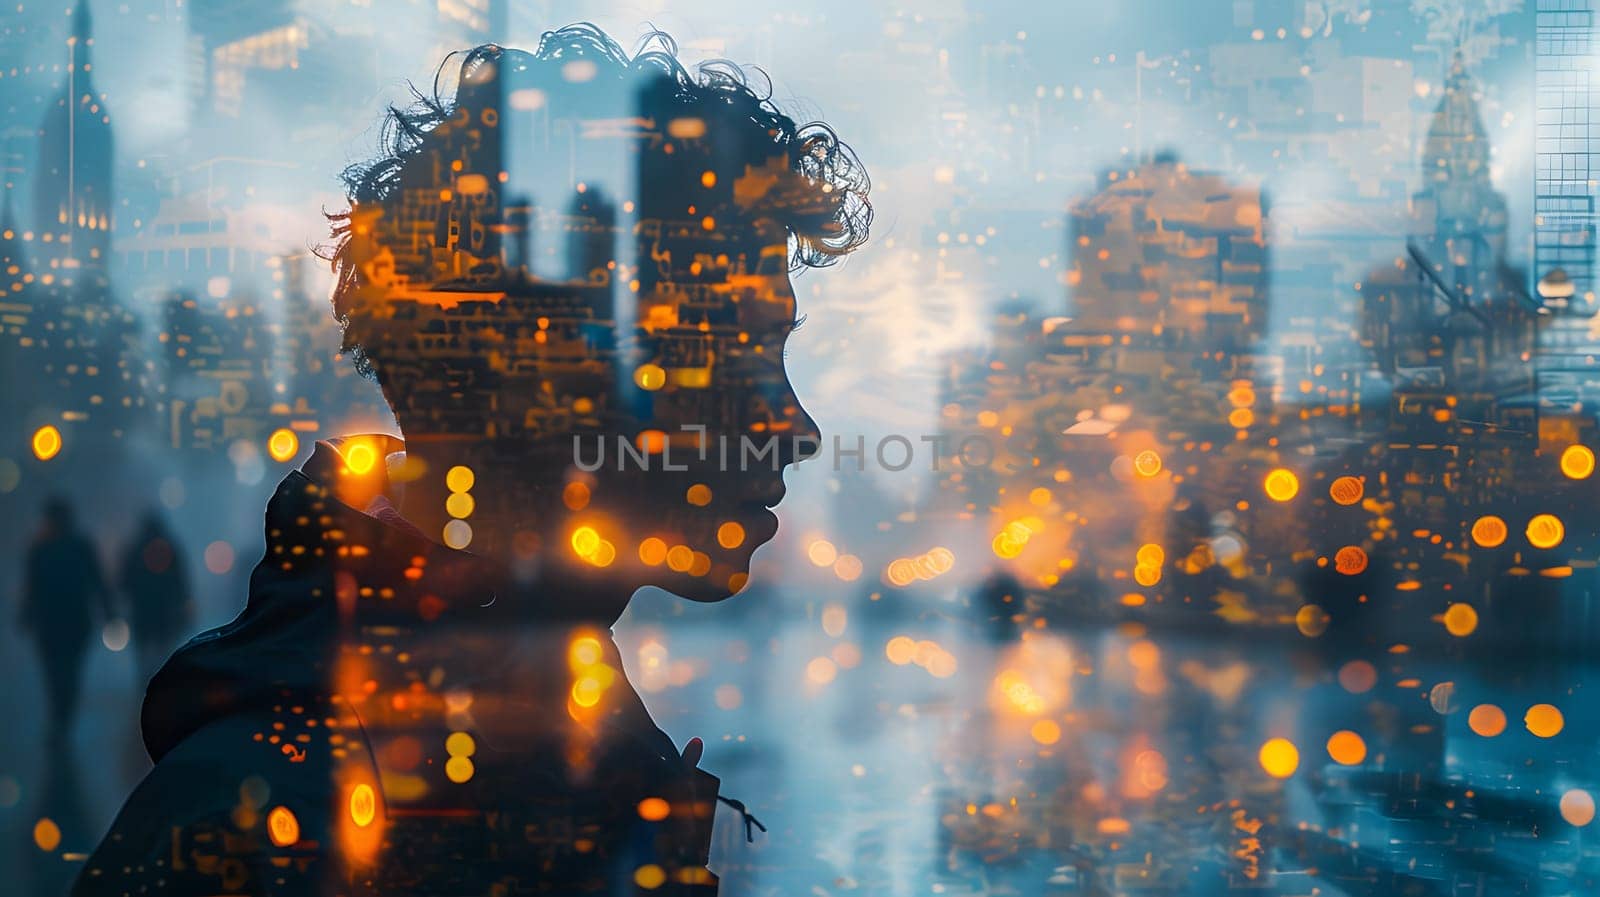 A unique double exposure of a man against a city skyline with water, clouds, heat, gas, and towering blocks, creating a world of flames and geological phenomena in the urban setting